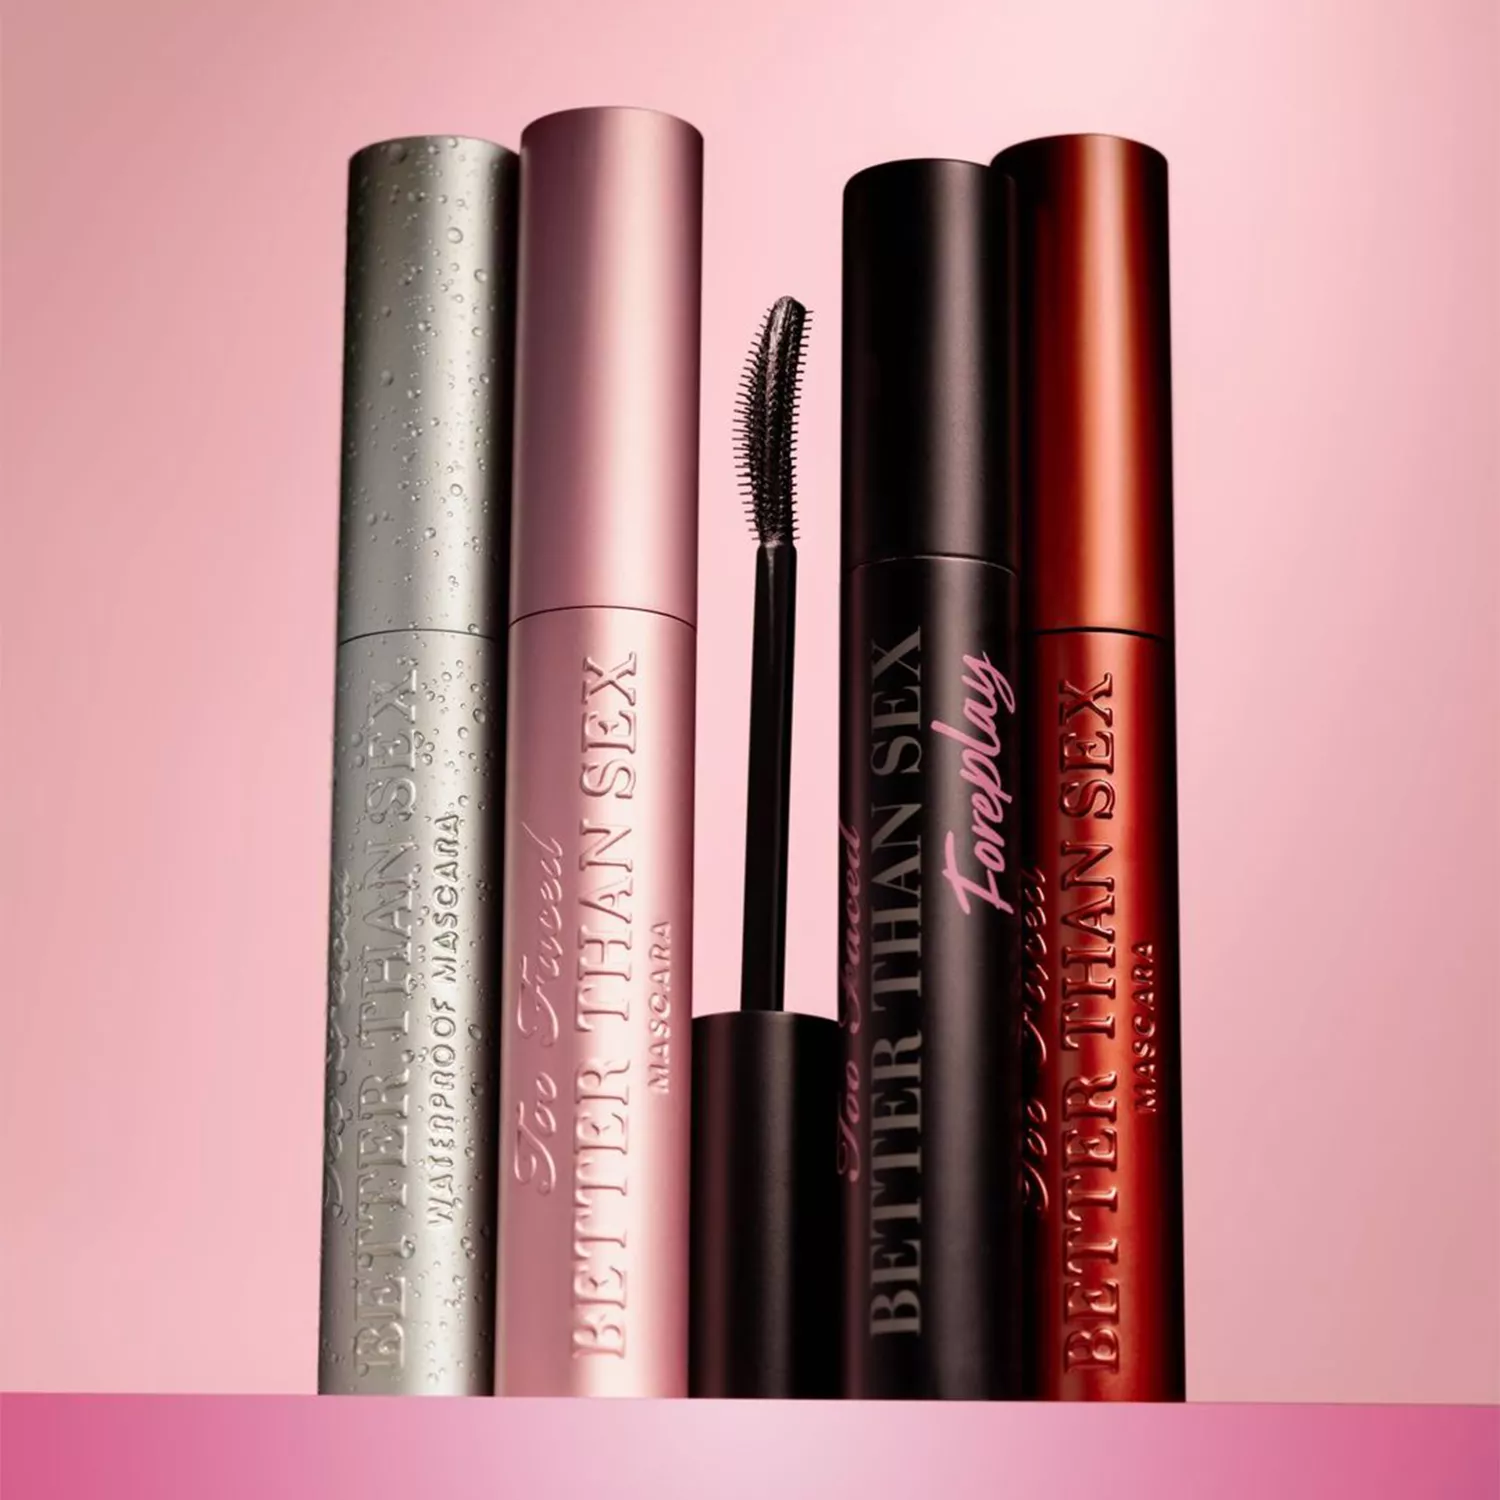 Too Faced Mascaras on a pink background